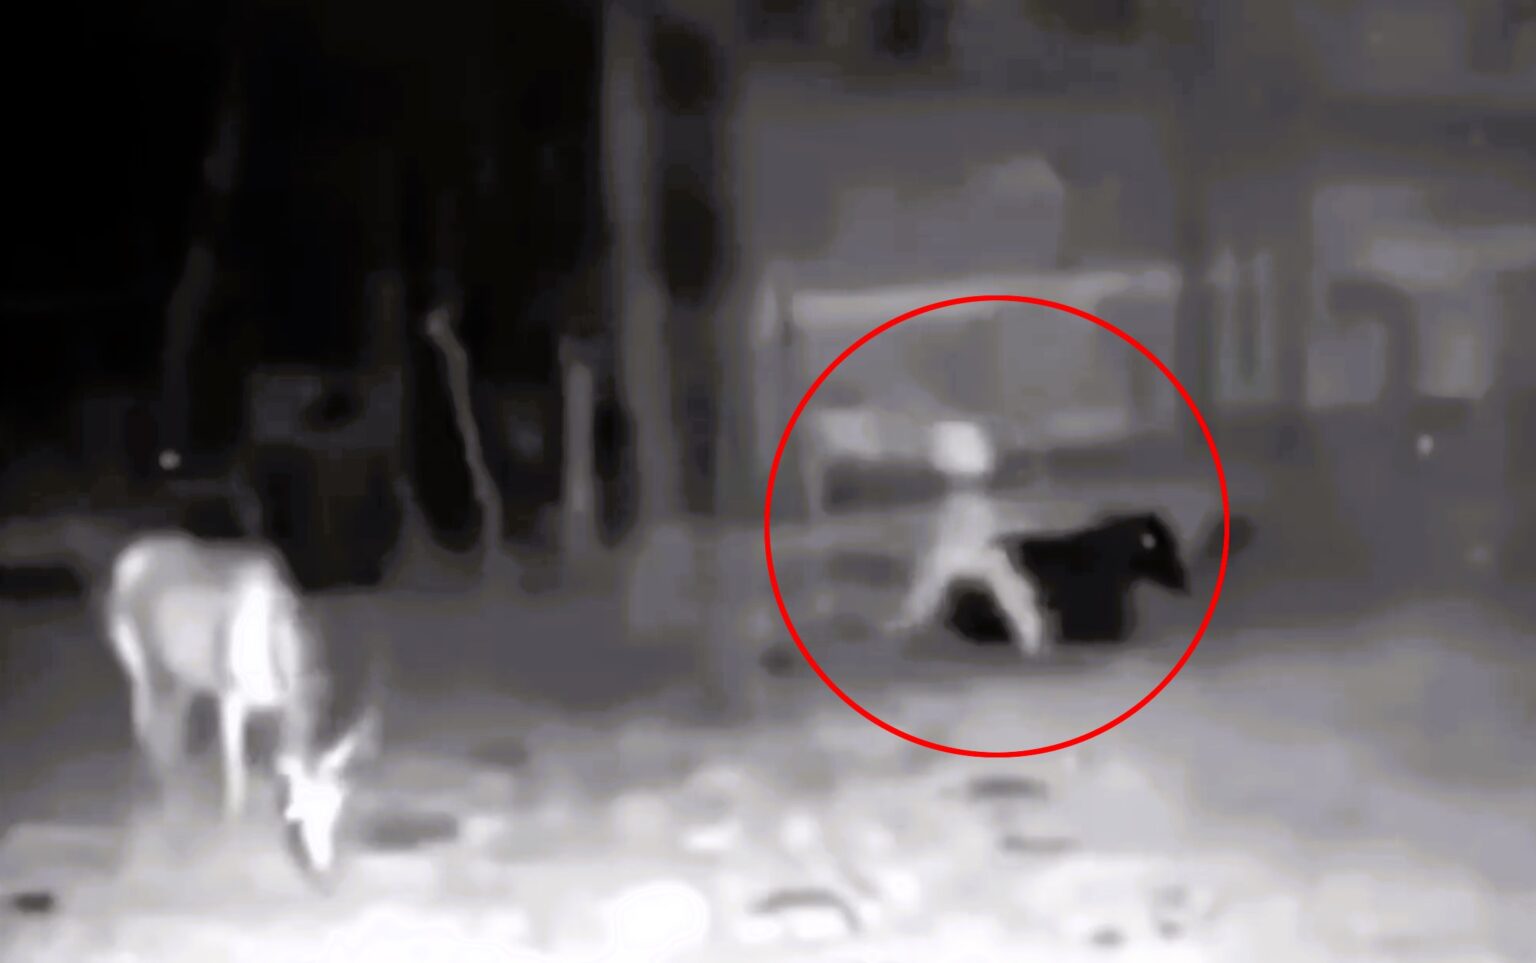 A strange figure resembling a 'goblin without arms' was caught on farm CCTV in El Salvador, sparking debate among locals and ufologists about its origins. Despite skepticism and claims of possible fabrication, the mysterious entity's appearance remains a subject of intrigue and speculation.